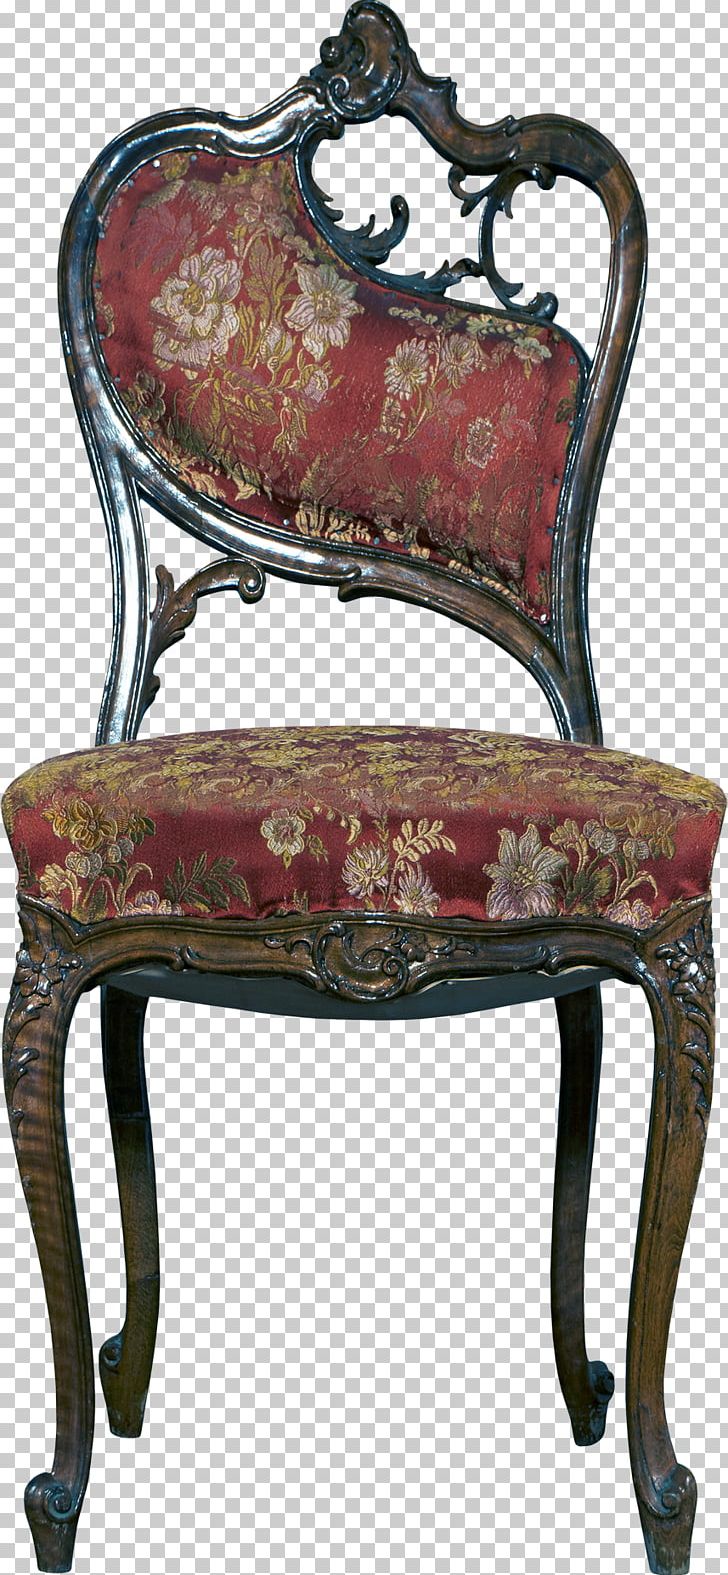 Table Chair Furniture Stool Couch PNG, Clipart, Antique, Antique Furniture, Chair, Couch, Dining Room Free PNG Download